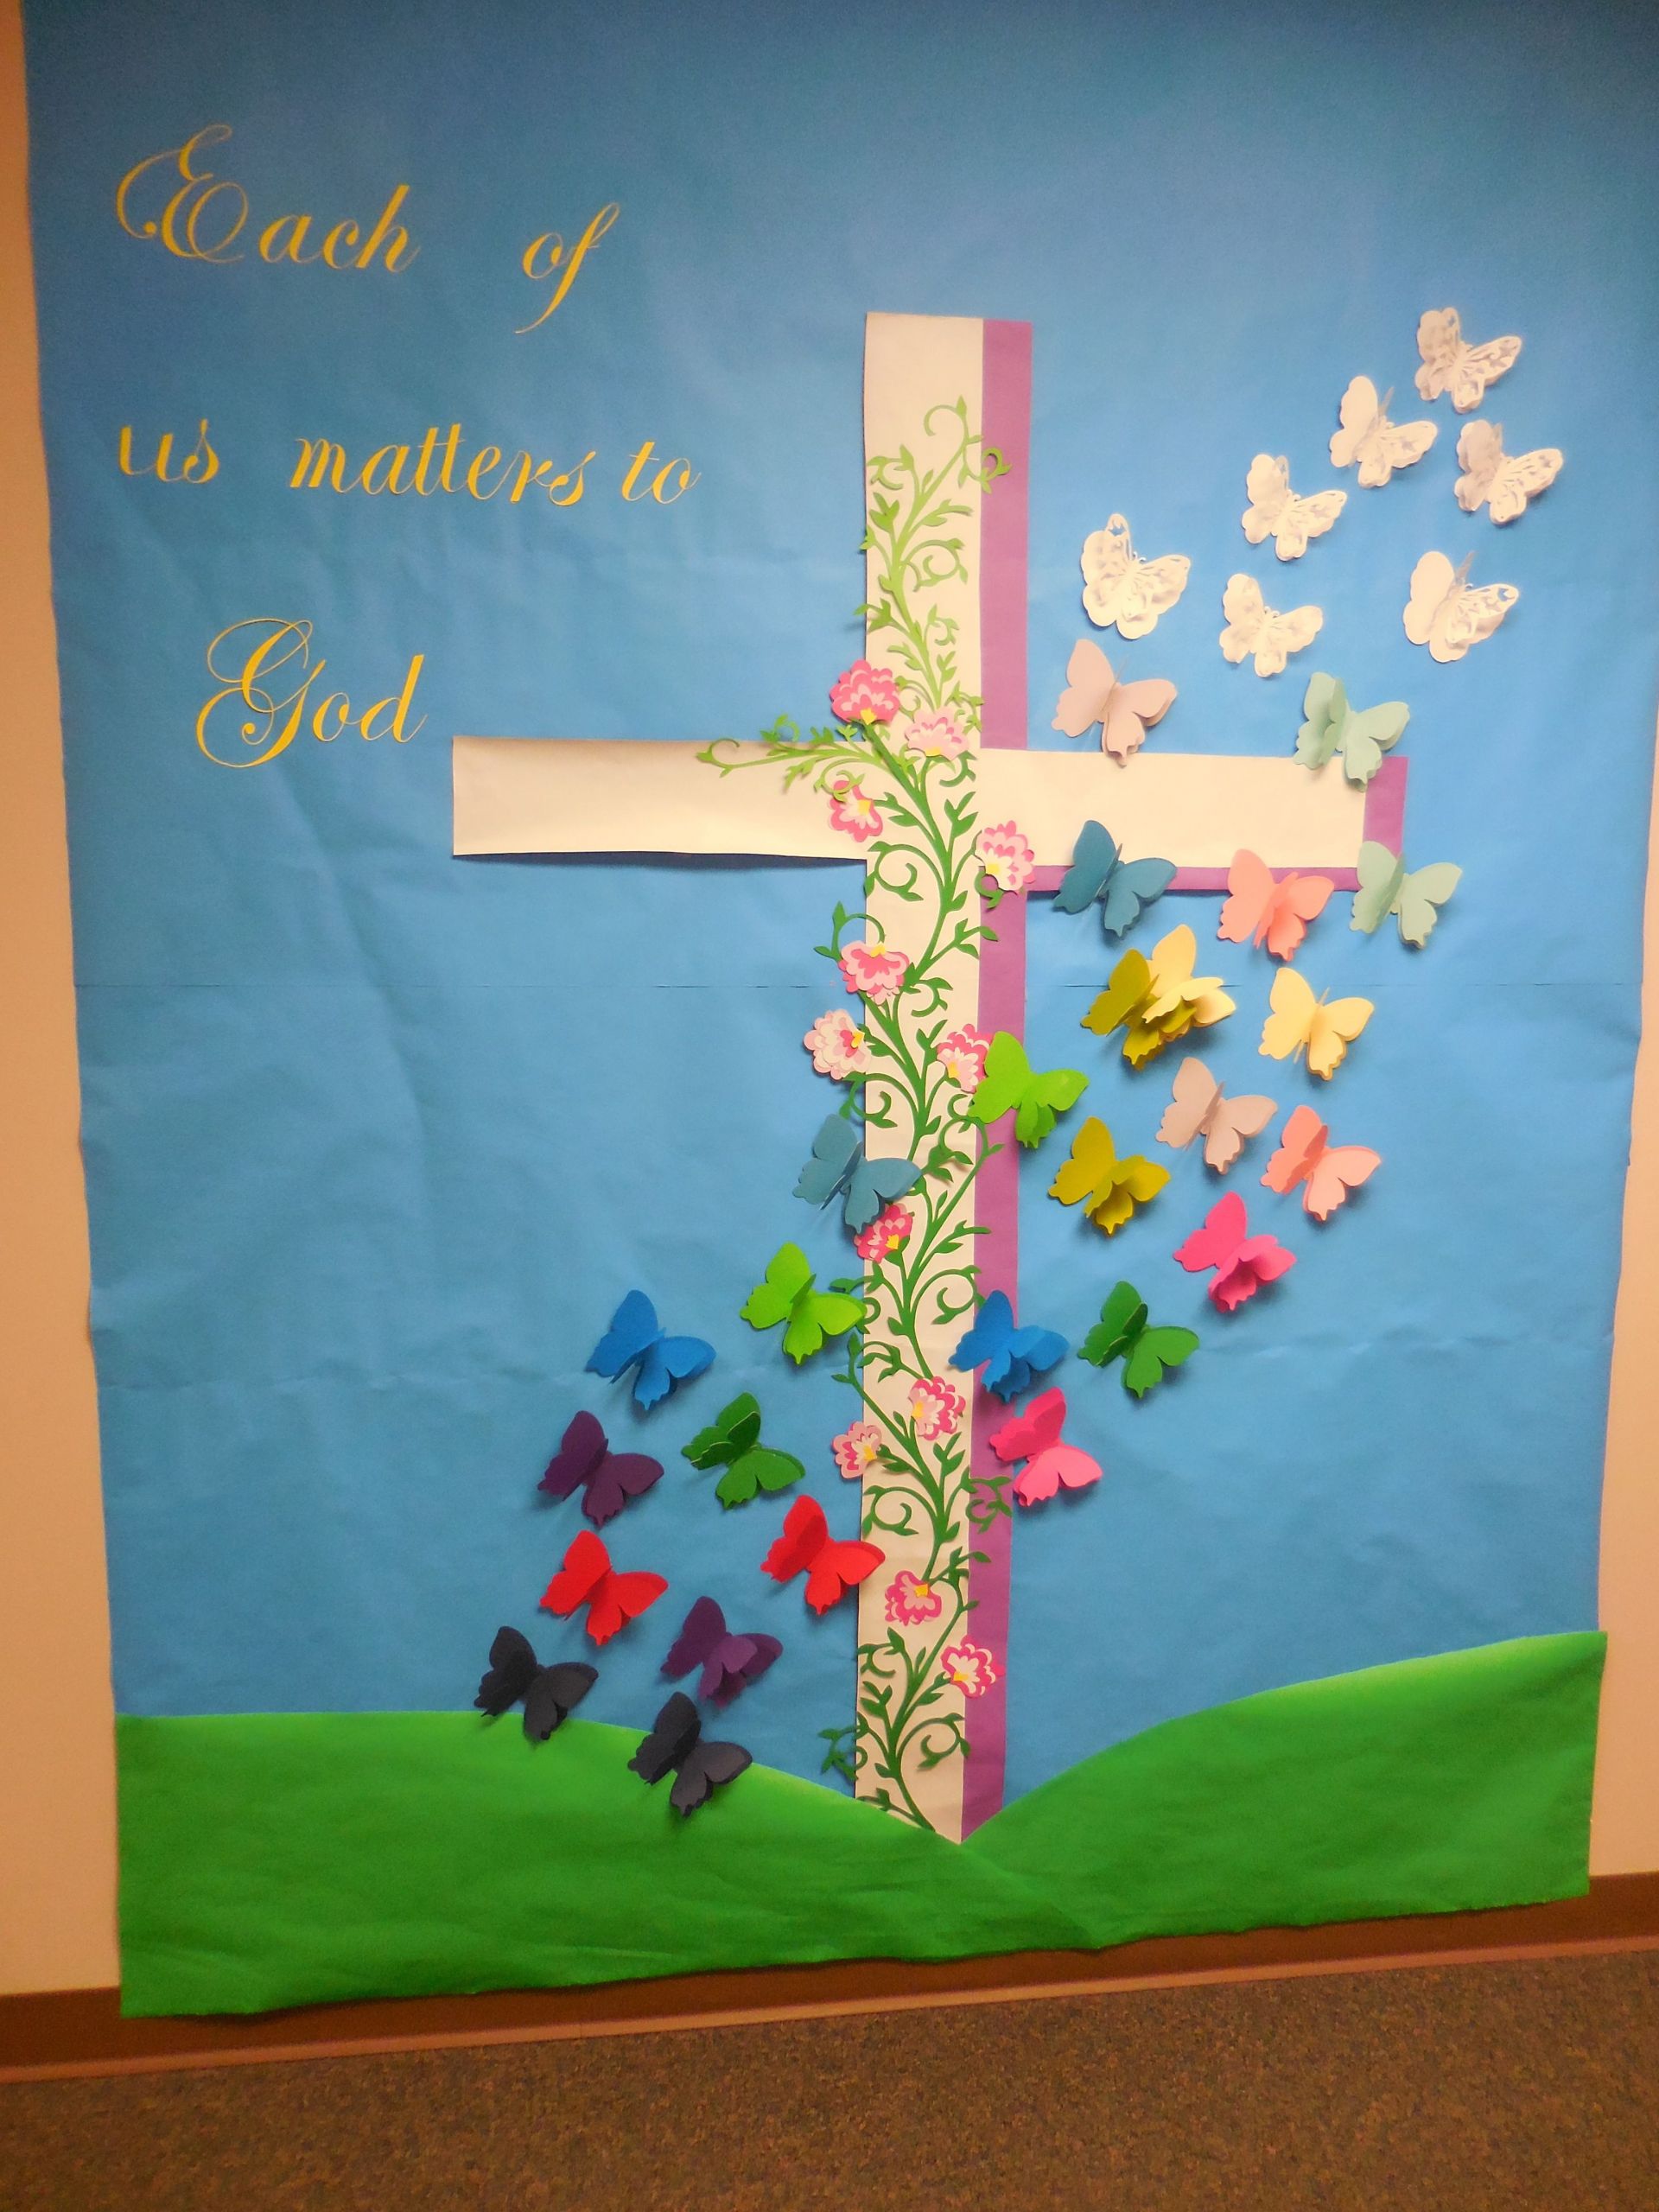 Christian School Easter Party Ideas
 "Each of Us matters to God" April Easter Resurrection